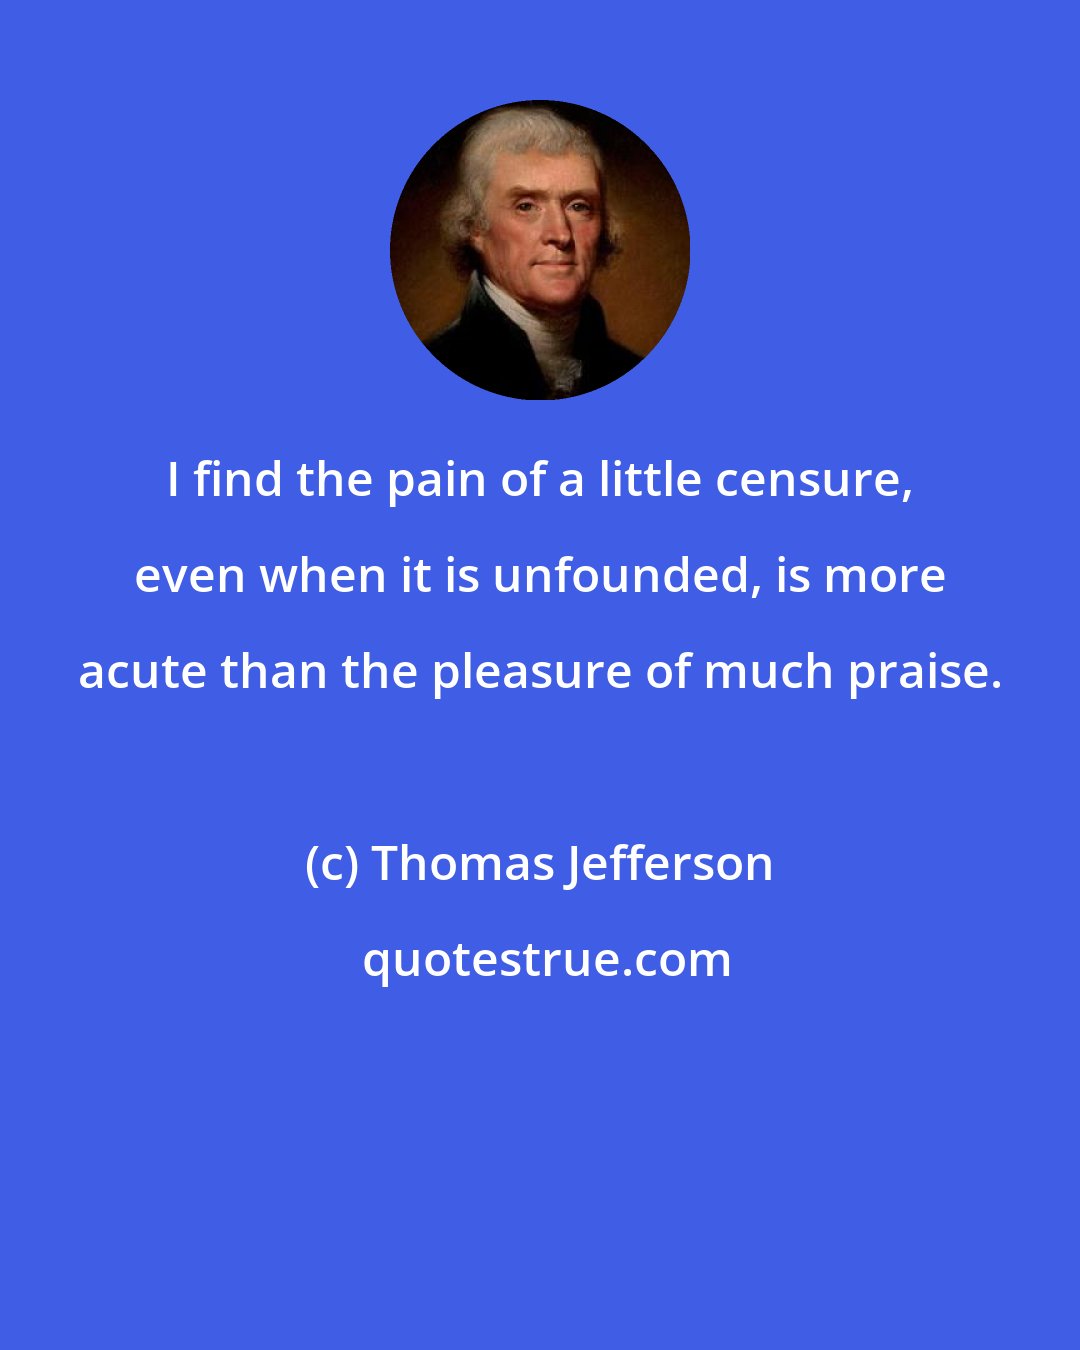 Thomas Jefferson: I find the pain of a little censure, even when it is unfounded, is more acute than the pleasure of much praise.